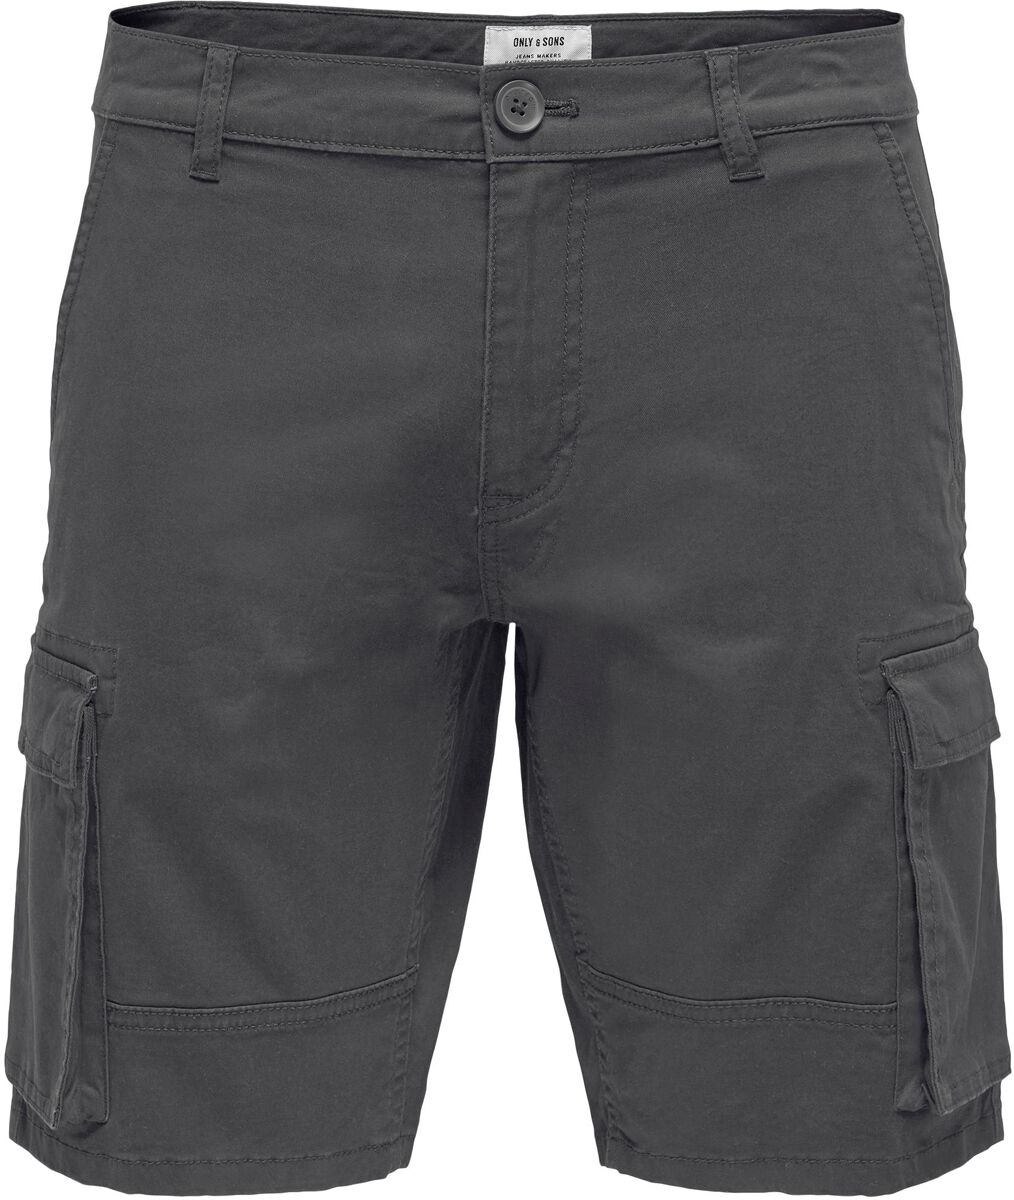 Image of Shorts di ONLY and SONS - ONSCam Stage Cargo Shorts PK 6689 - S a XXL - Uomo - grigio